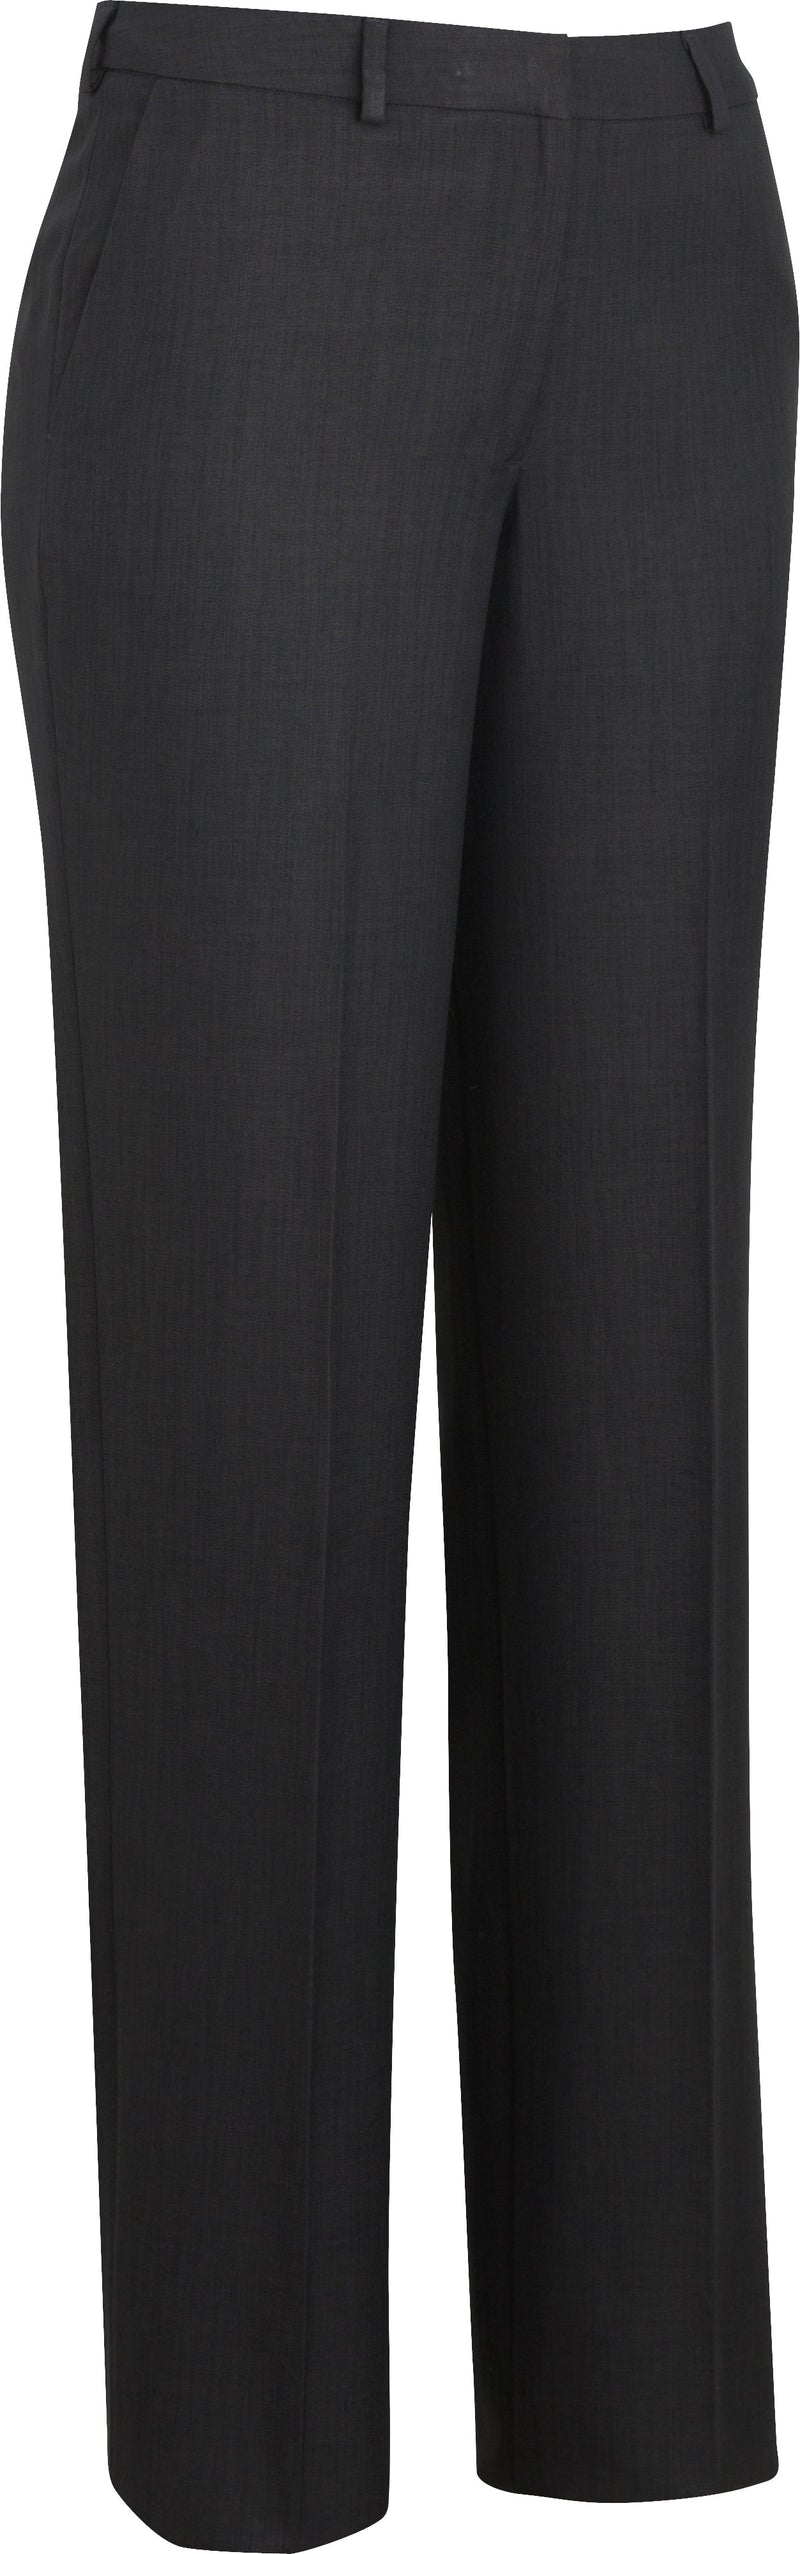 Edwards Garment [8526] Ladies Lightweight Washable Comfort Stretch Dress Pants.  Redwood & Ross Synergy Collection.  Live Chat For Bulk Discounts.